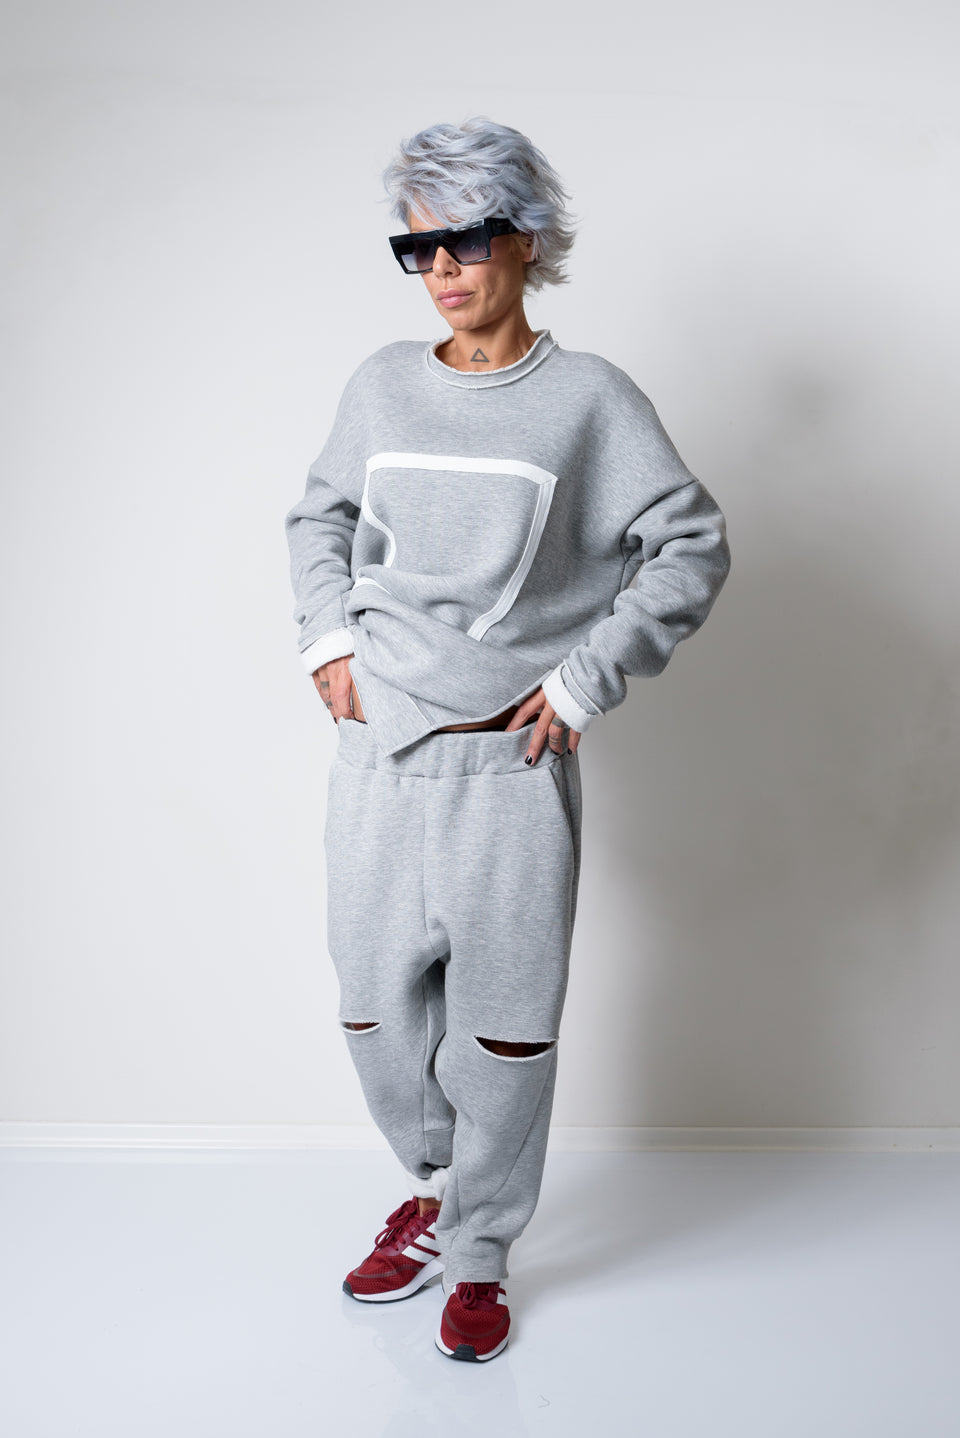 Womens Two Piece Tracksuit Gym Set Sexy Sportswear Sweatshirt And Crop Top  And Sweatpants For Jogging And Full Fit Wear S0C4121W 210712 From Dou02,  $20.62